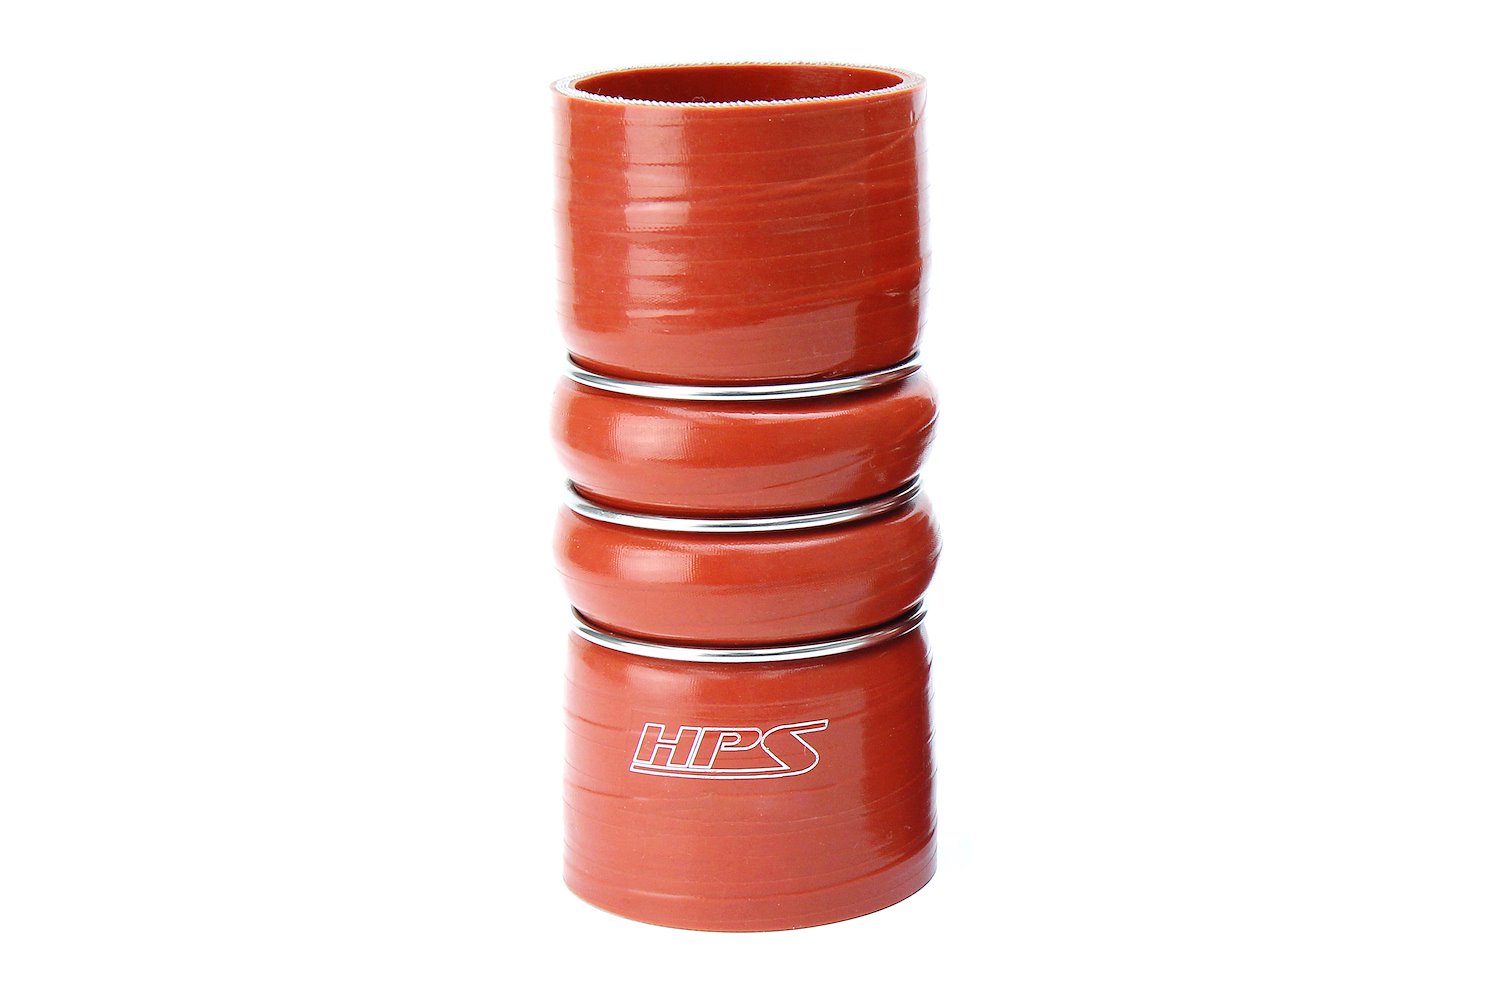 CAC-375-HOT Silicone CAC Hose, Silicone CAC Hump Hose Hot, High-Temp 4-Ply Aramid Reinforced, 3-3/4 in. ID, 6 in. Long